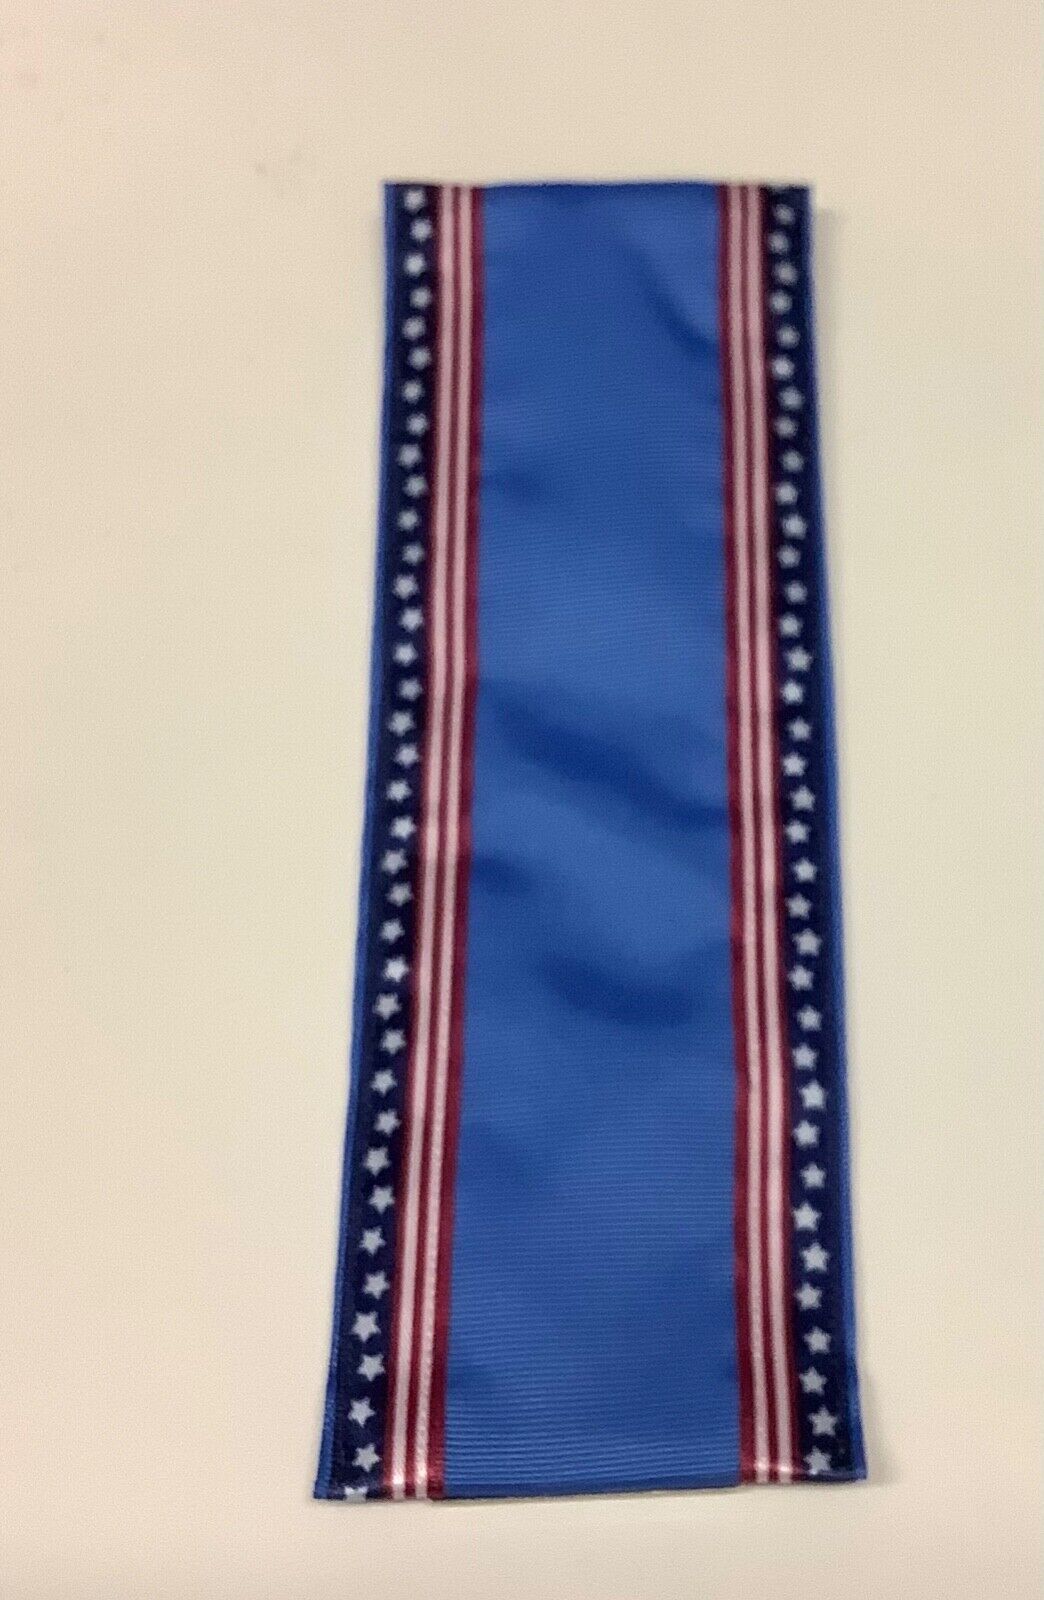 Dar Daughters Of The American Revolution Ribbon For Right Side Pins